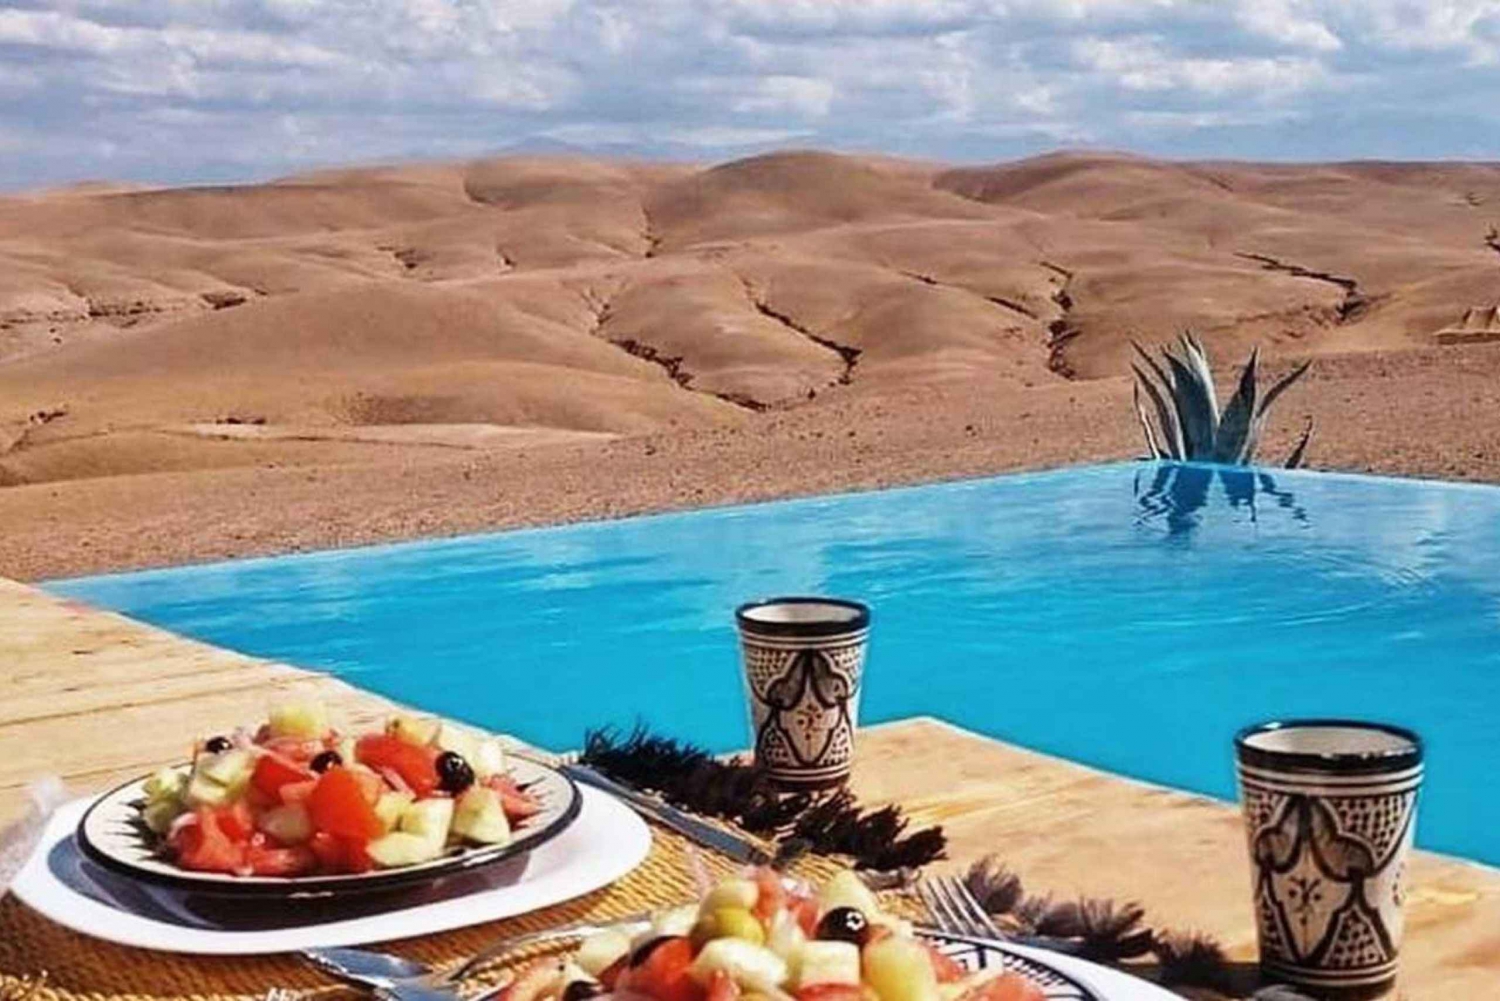 Lunch in agafay desert with transfers